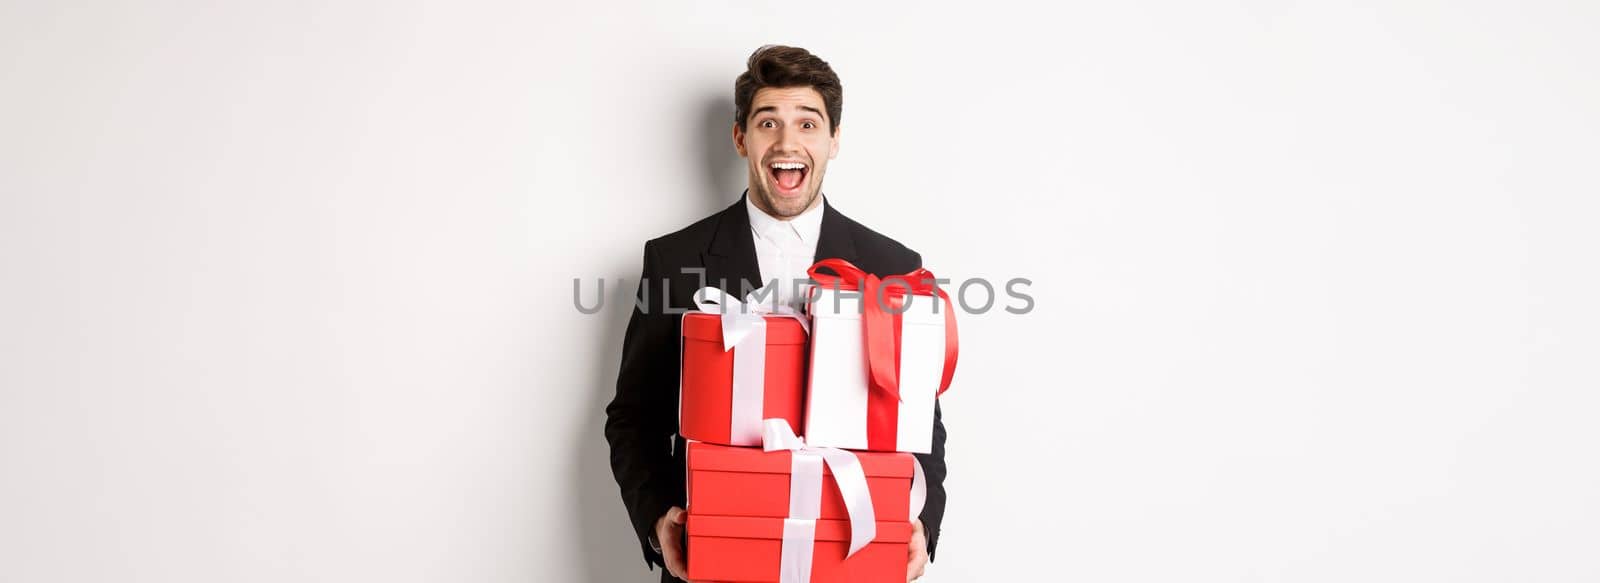 Concept of christmas holidays, celebration and lifestyle. Image of handsome amazed guy in suit, holding new year presents and smiling, standing against white background.